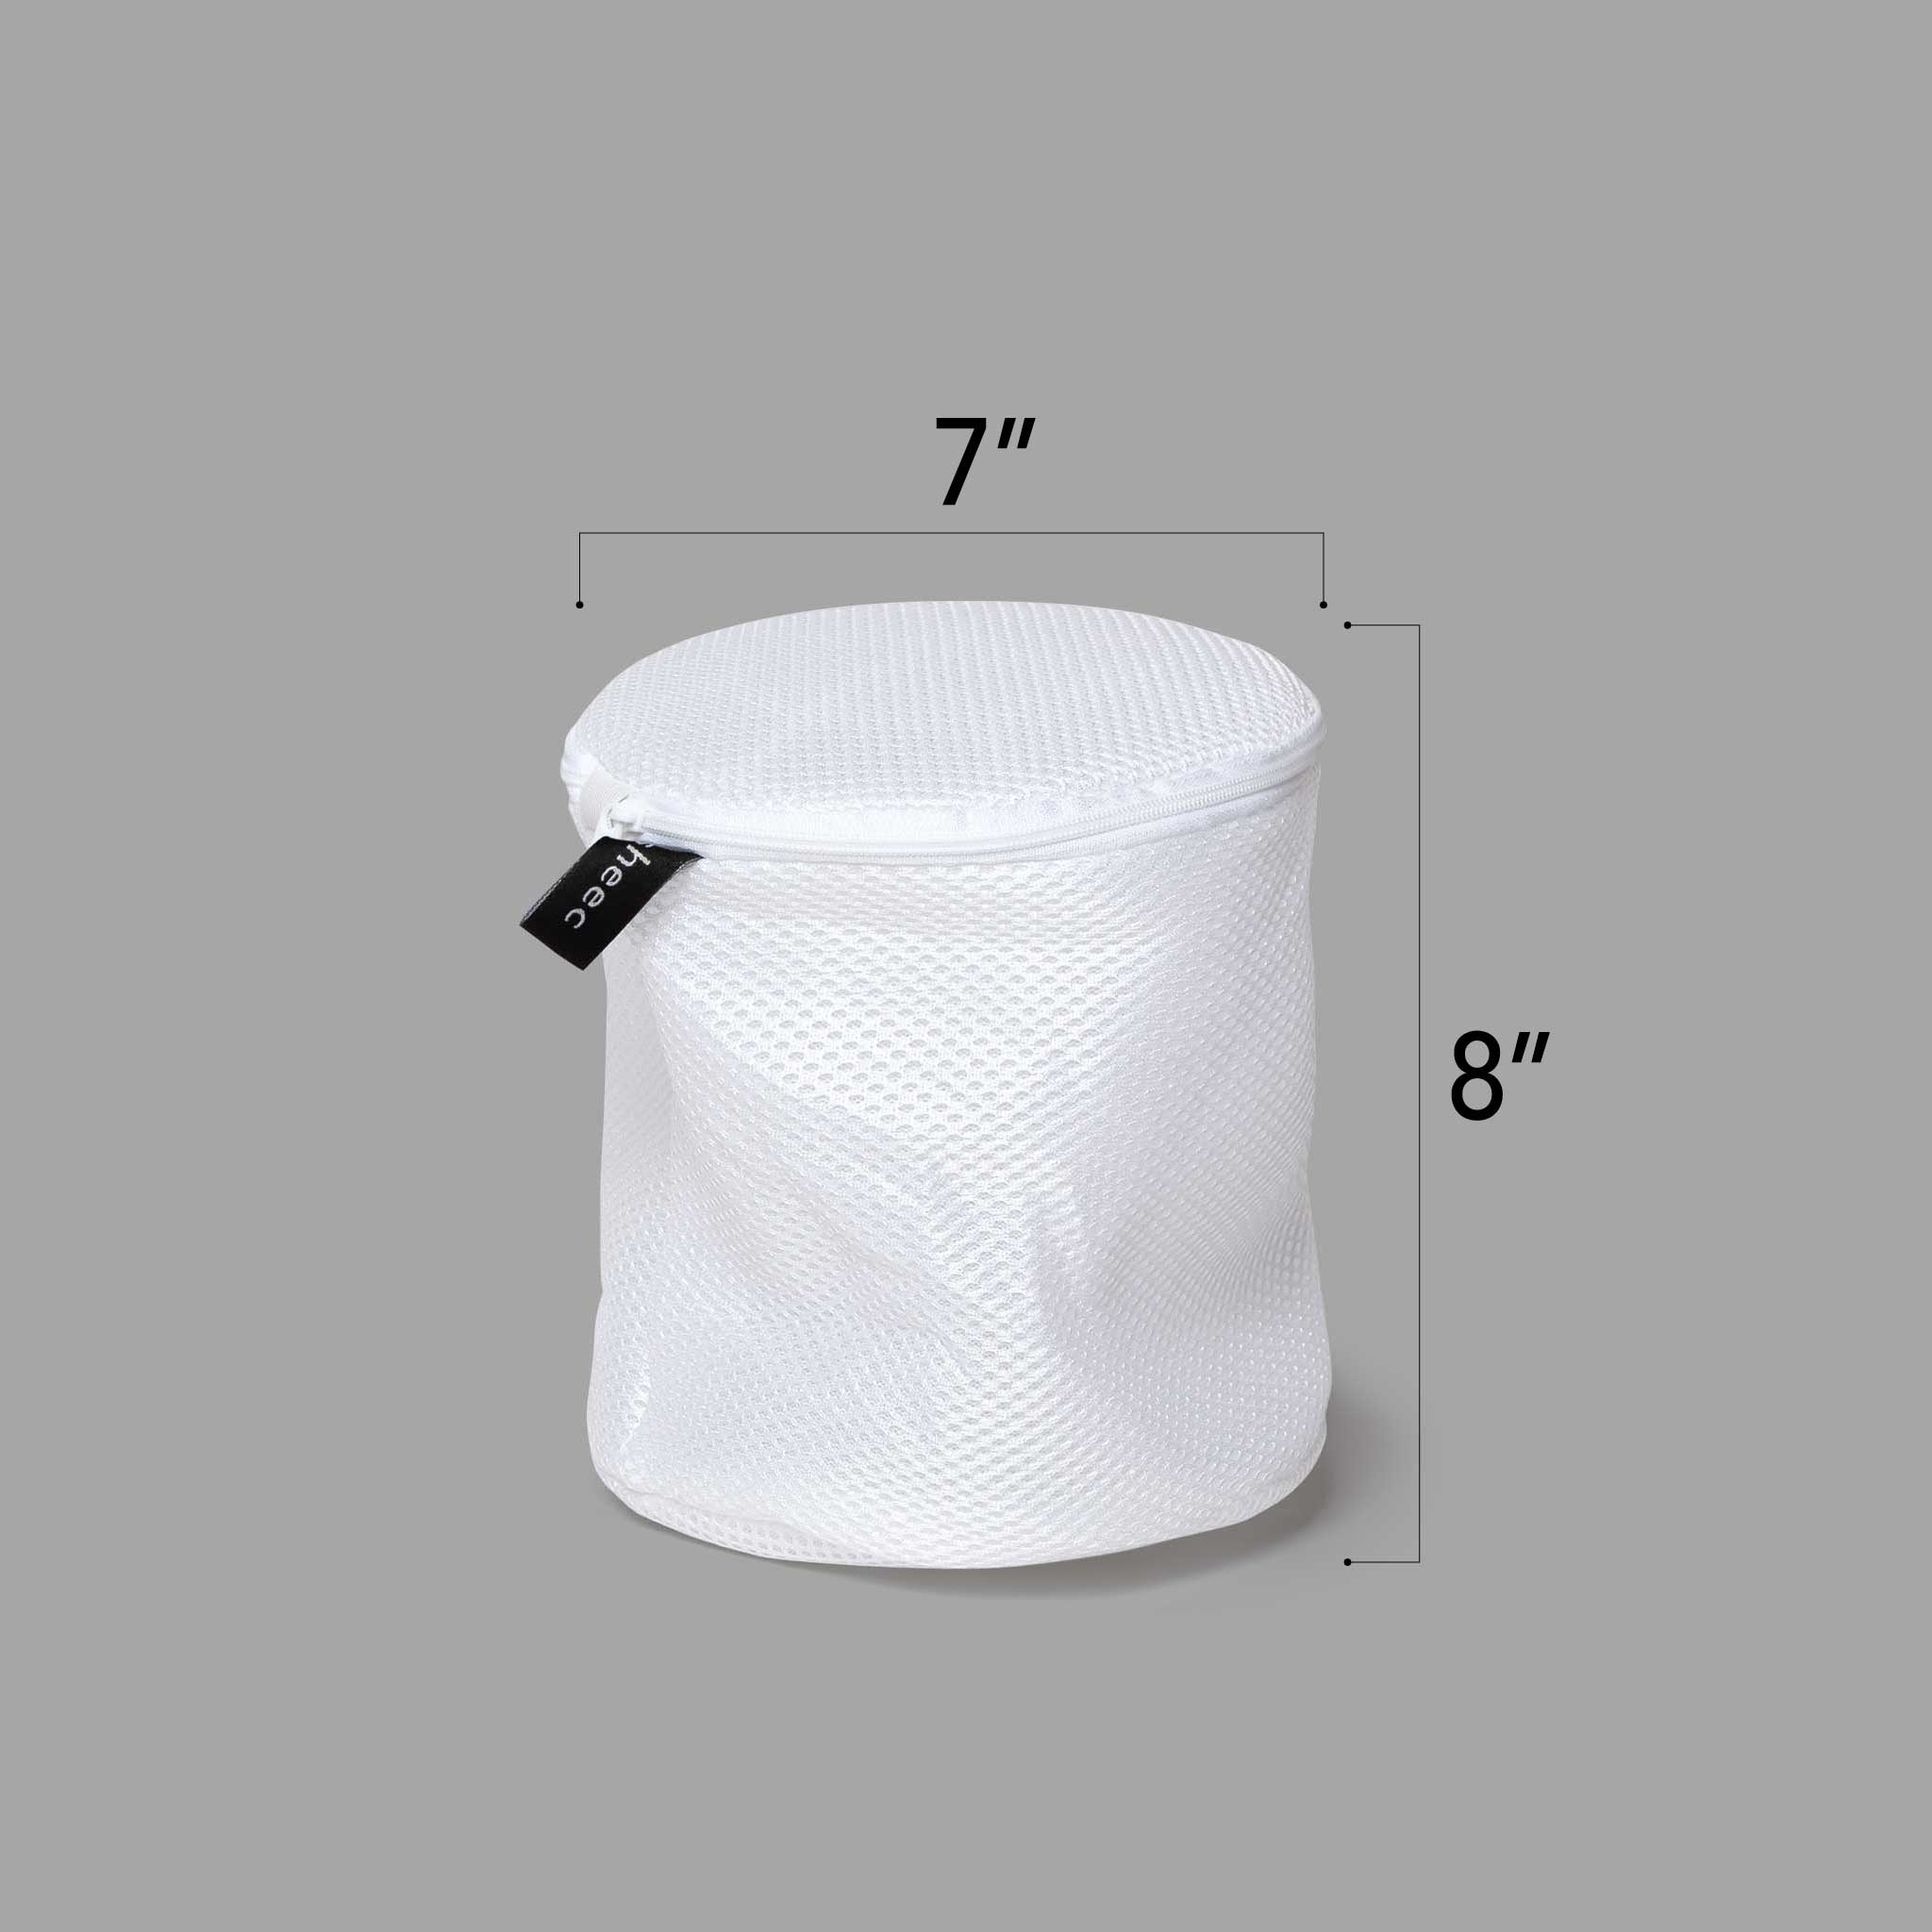 Put Laundry Bags On Double Spherical Bra Washing Bag Bra Protection-Women  Underwear Washer-Savior-Ball Shape Washing Clothes Bags Laundry Bra Bags 